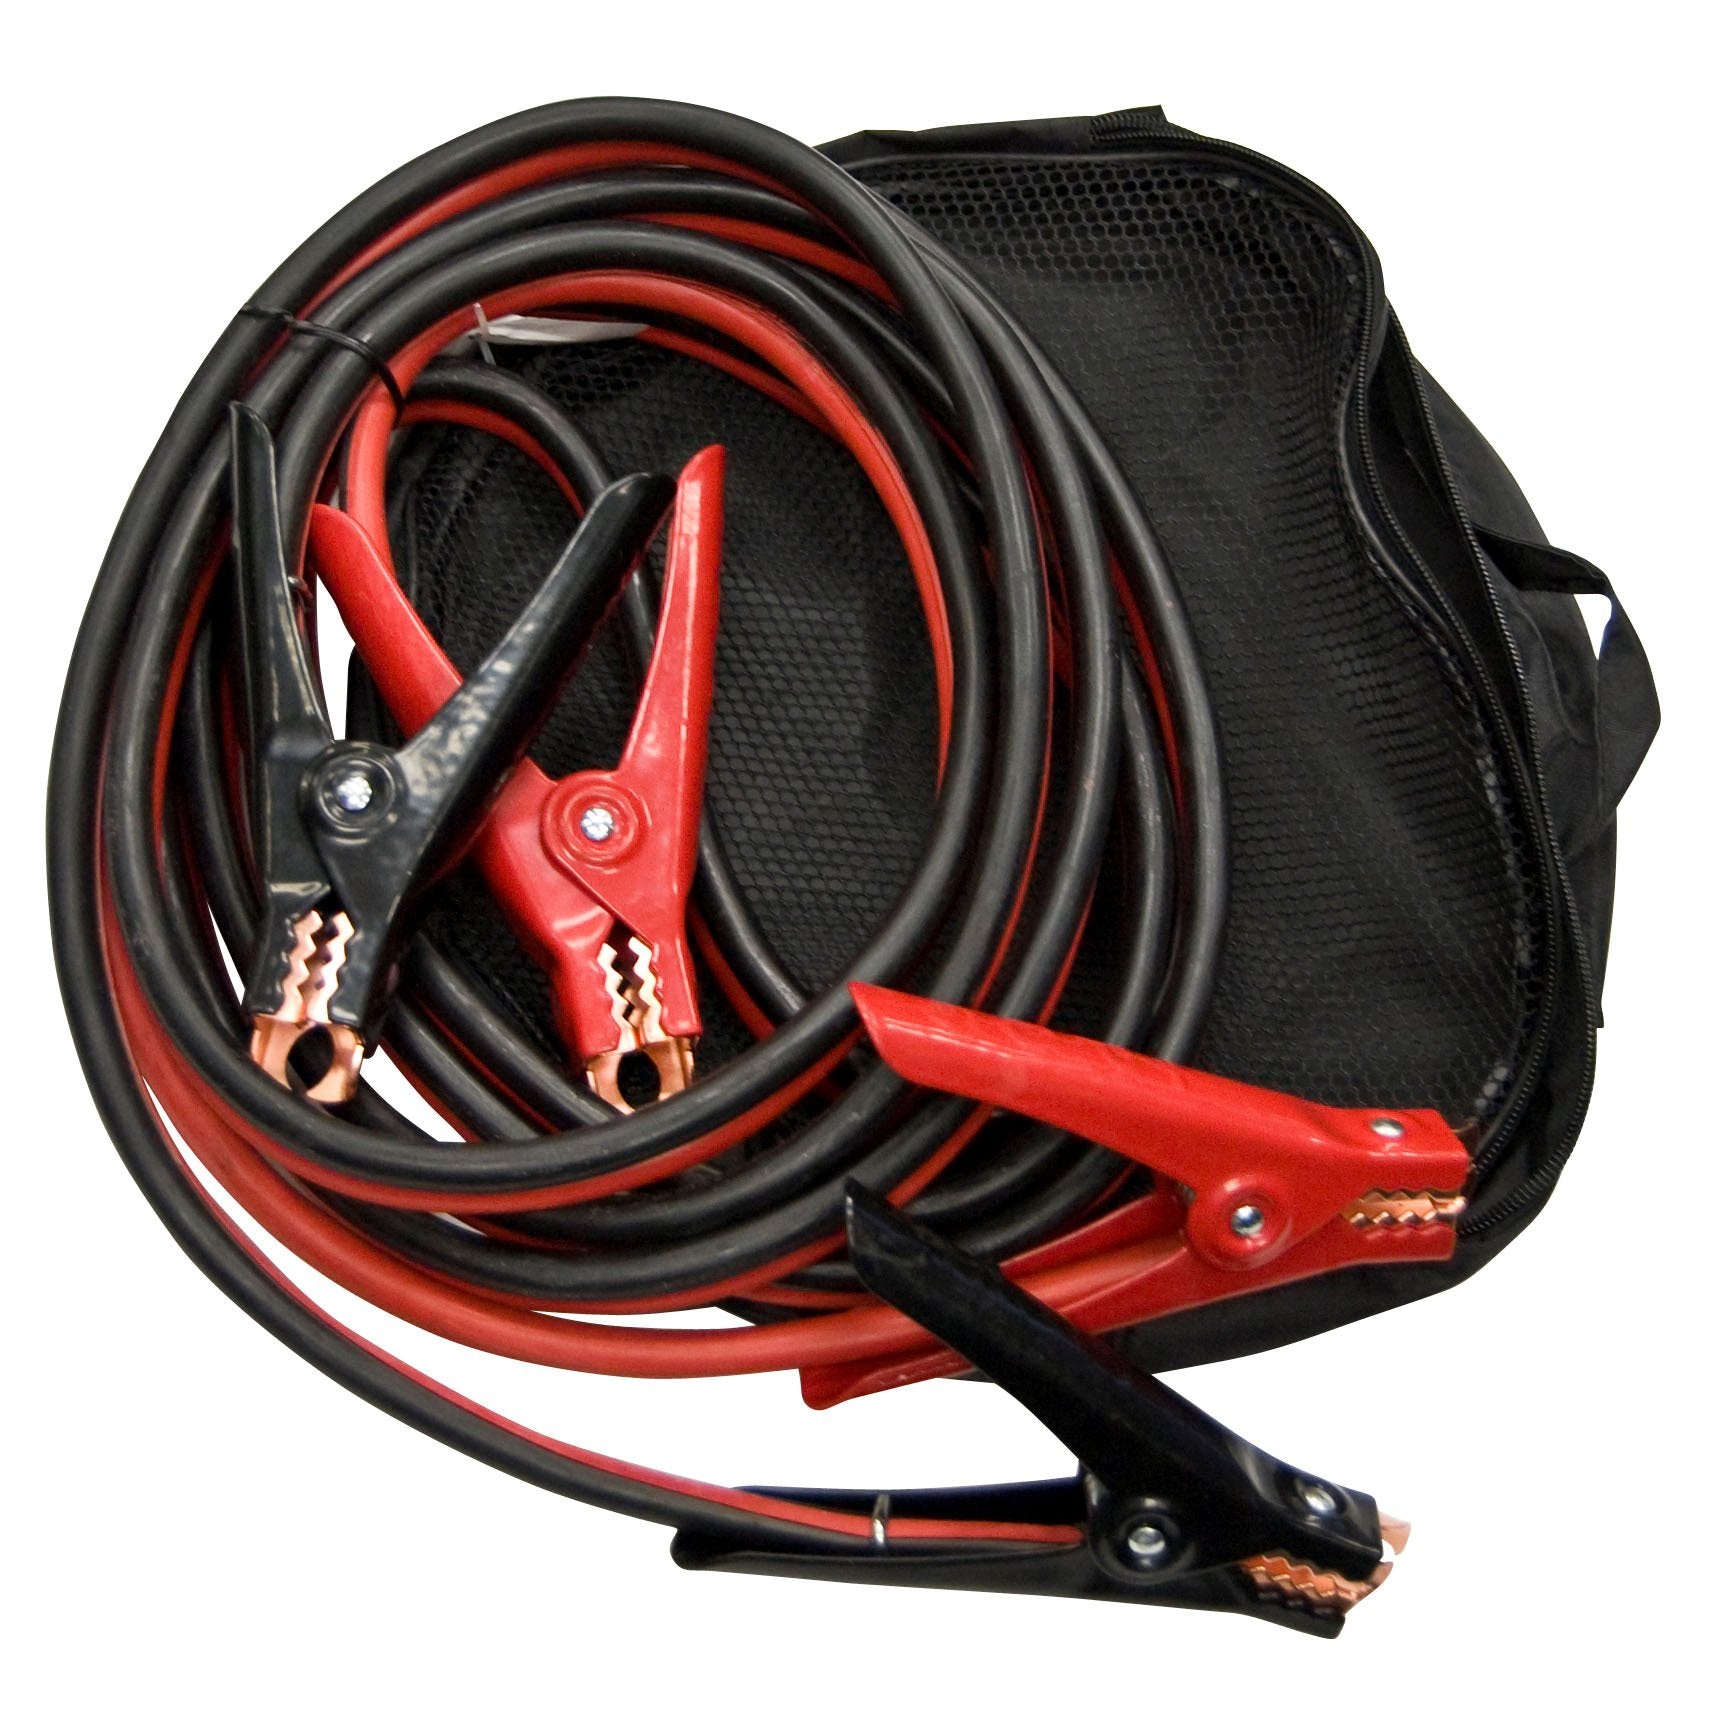 NOONE Jumper Cables with Smart-6 Protector, Professional Booster Cables 6  Gauge 16Feet (6AWG x 16Ft) with Carry Bag Included